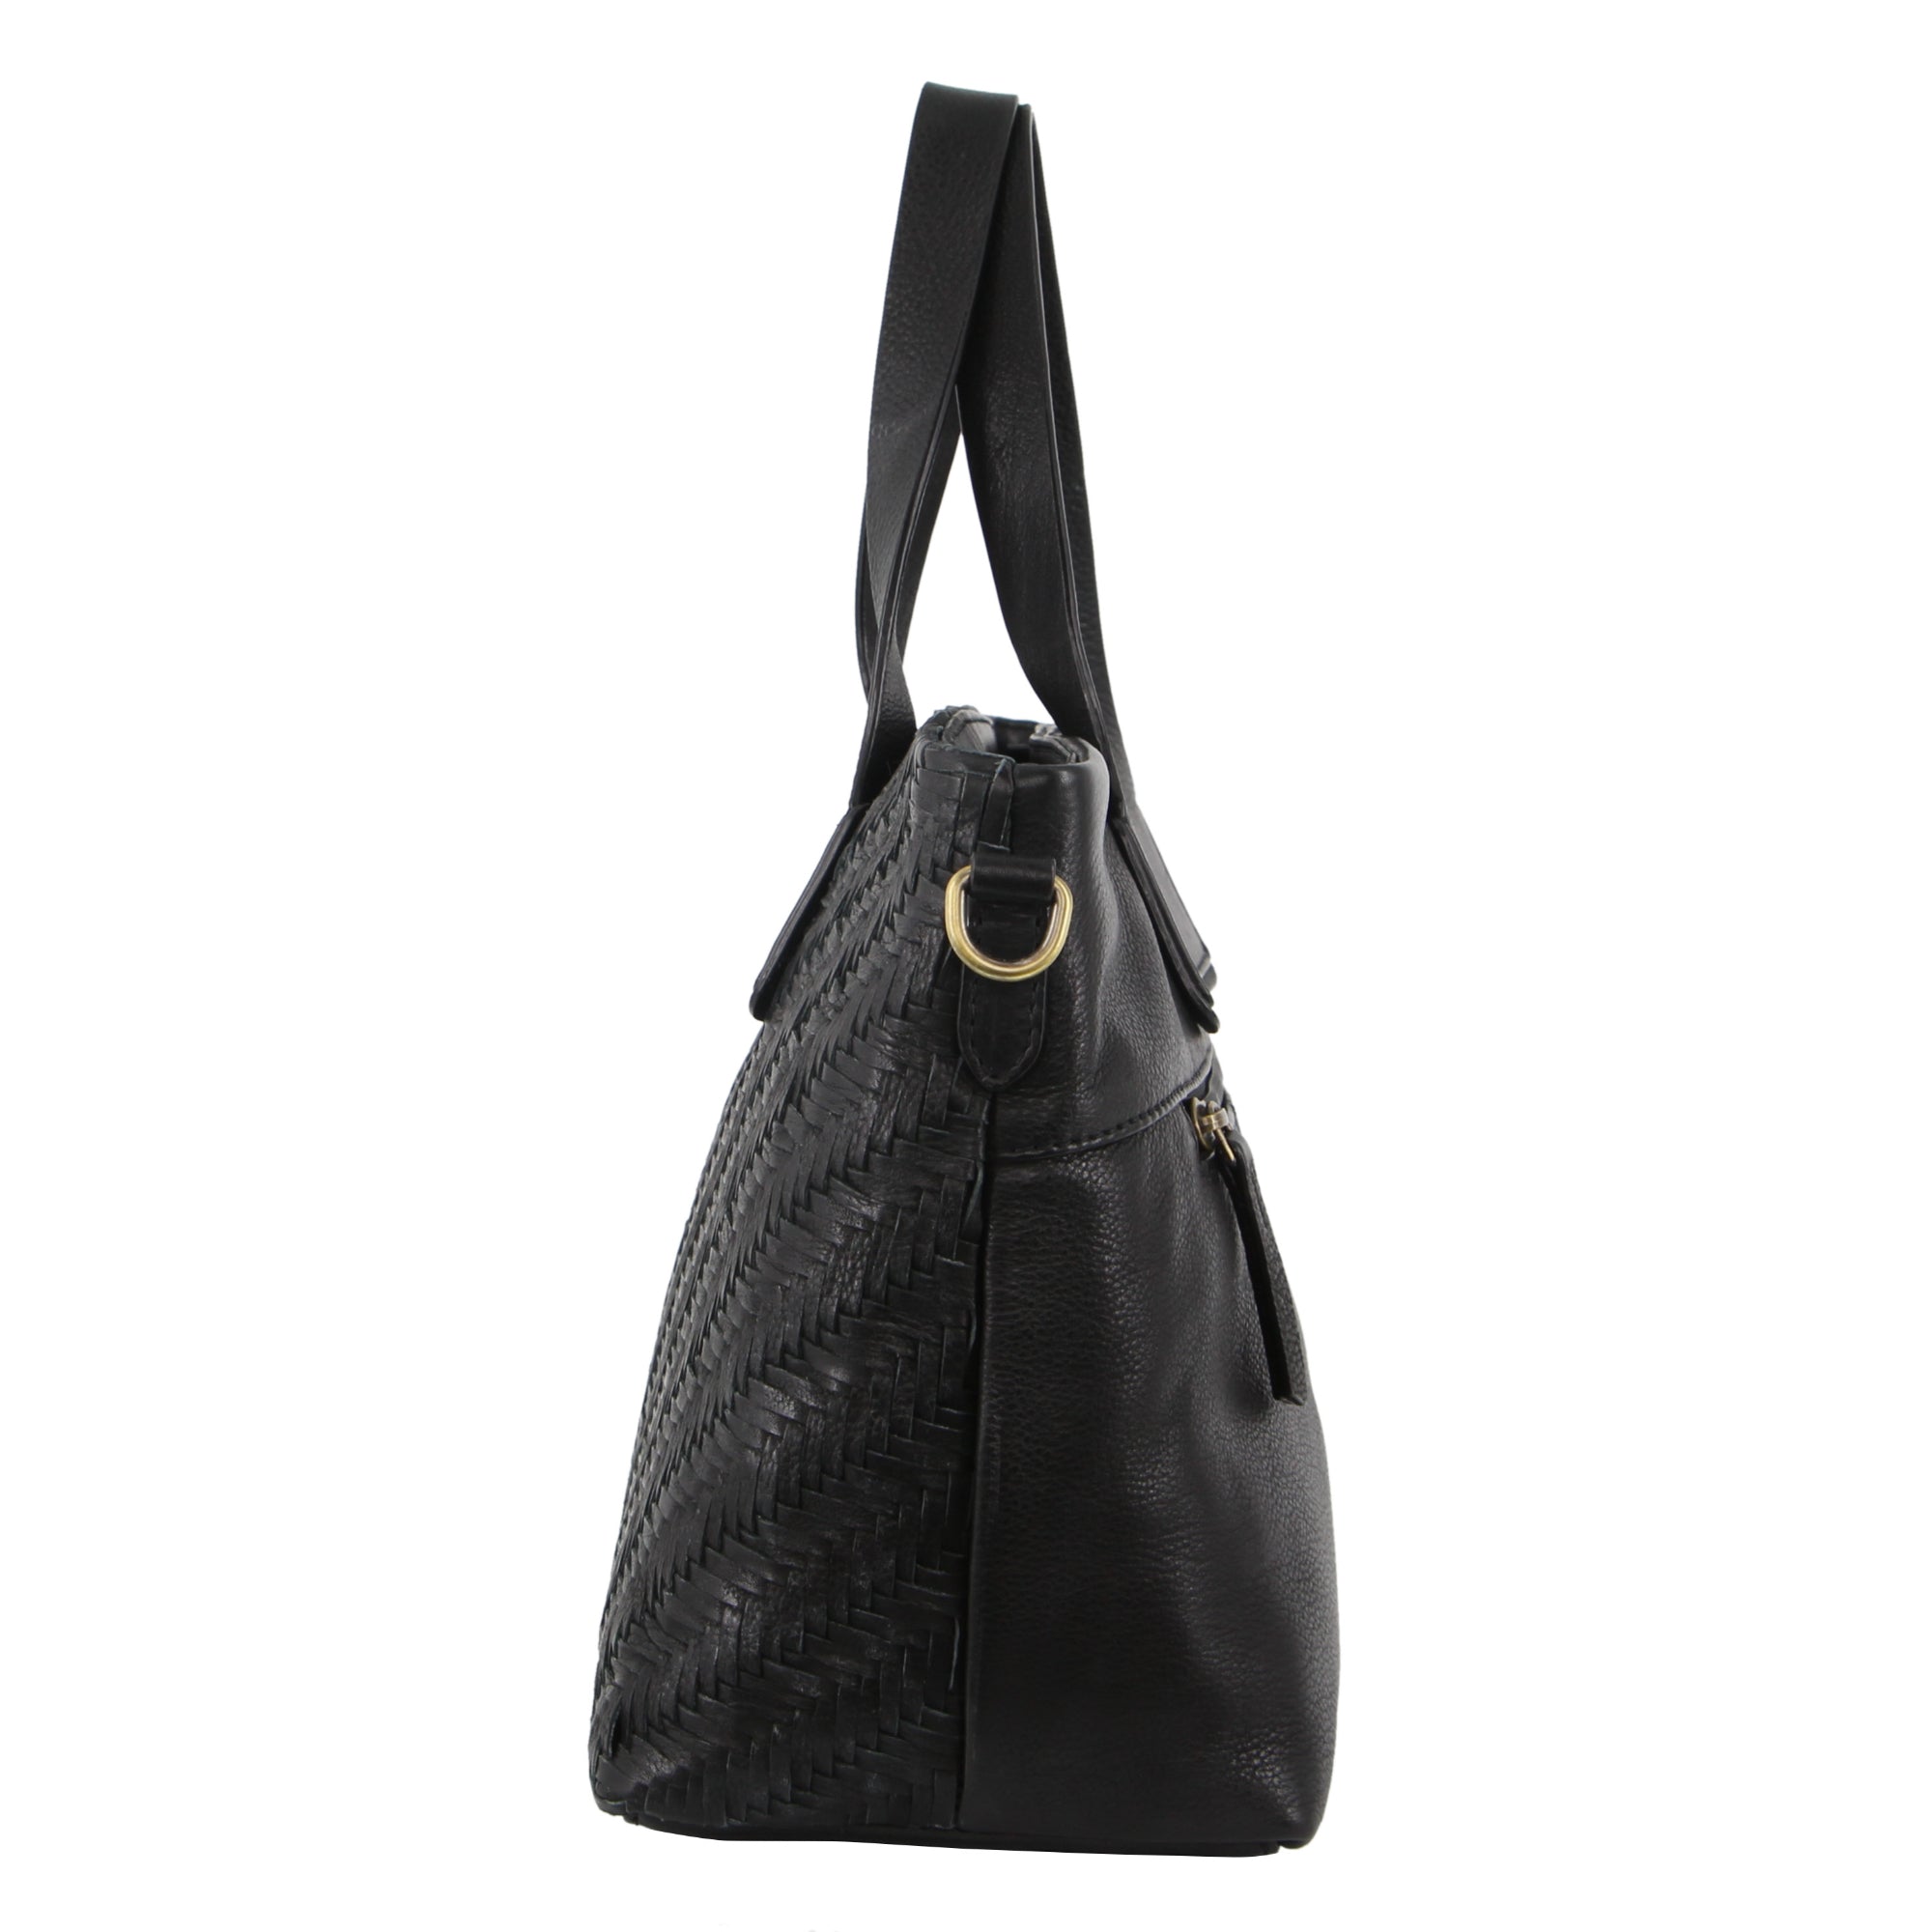 Pierre Cardin Woven Embossed Leather Tote Bag in Black